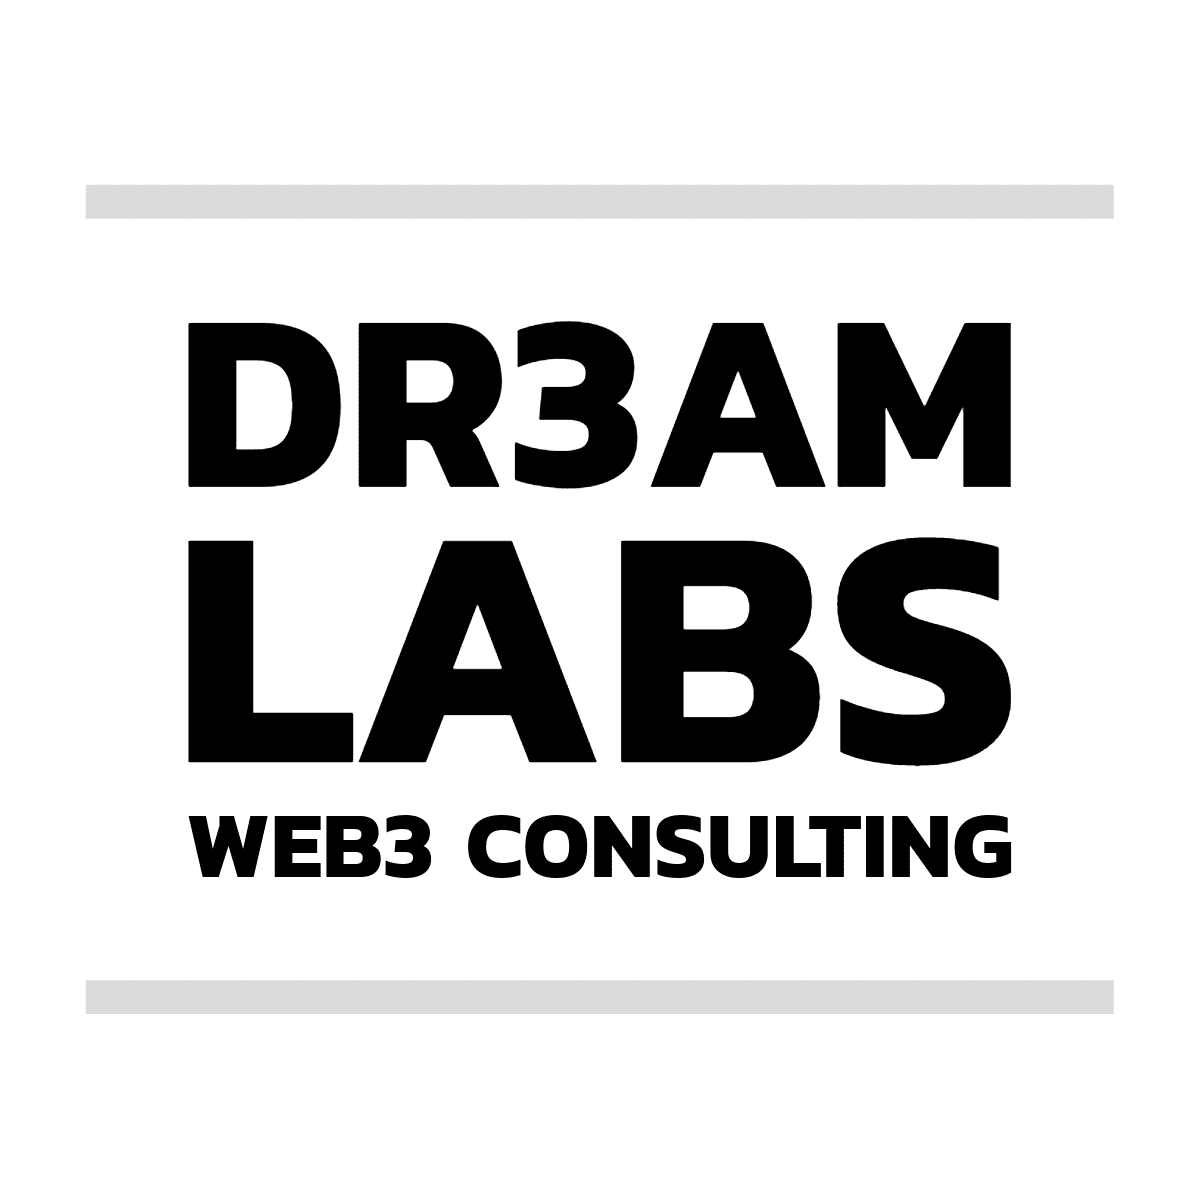 DR3AM LABS Web3 Consulting